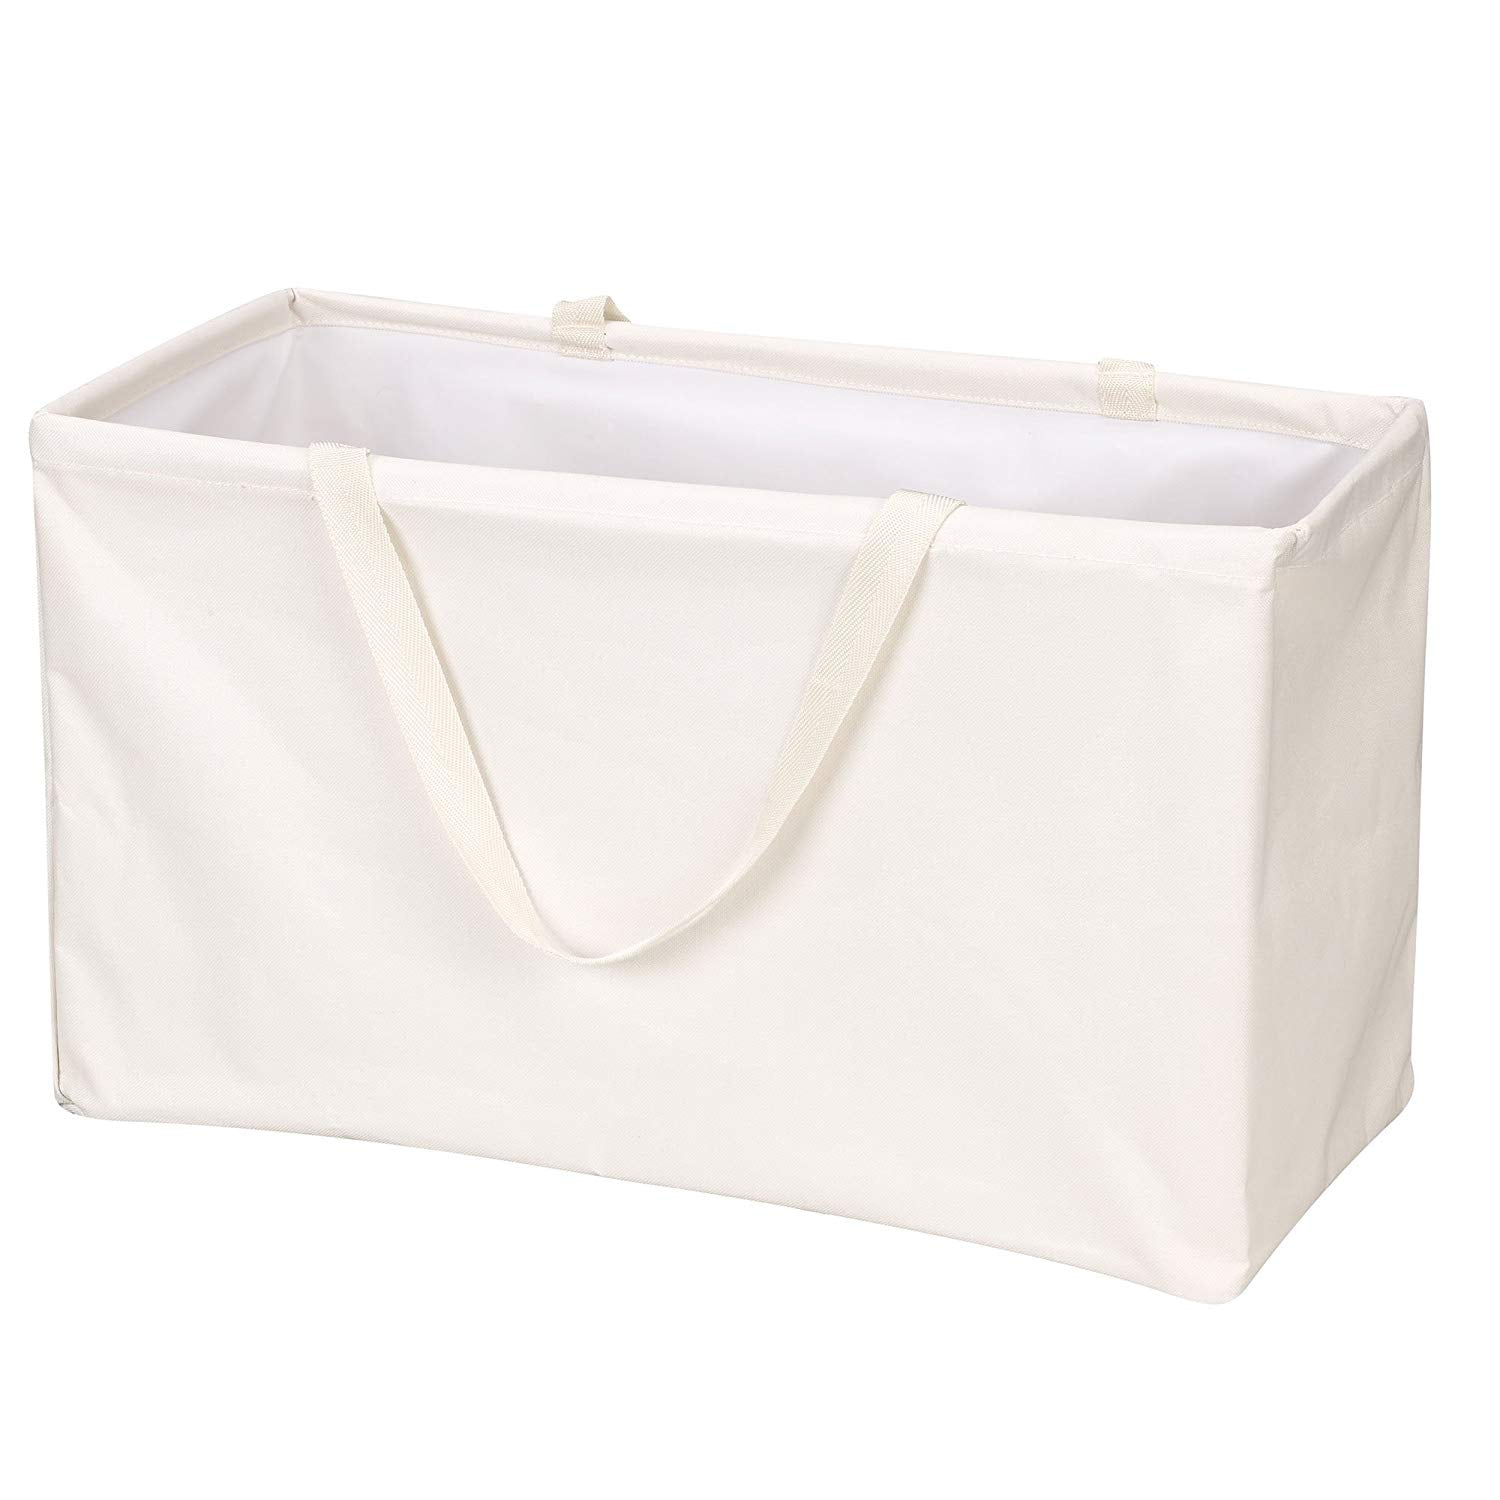 2213 Krush Canvas Utility Tote | Reusable Grocery Shopping Bag | Laundry Carry Bag | Beige ...